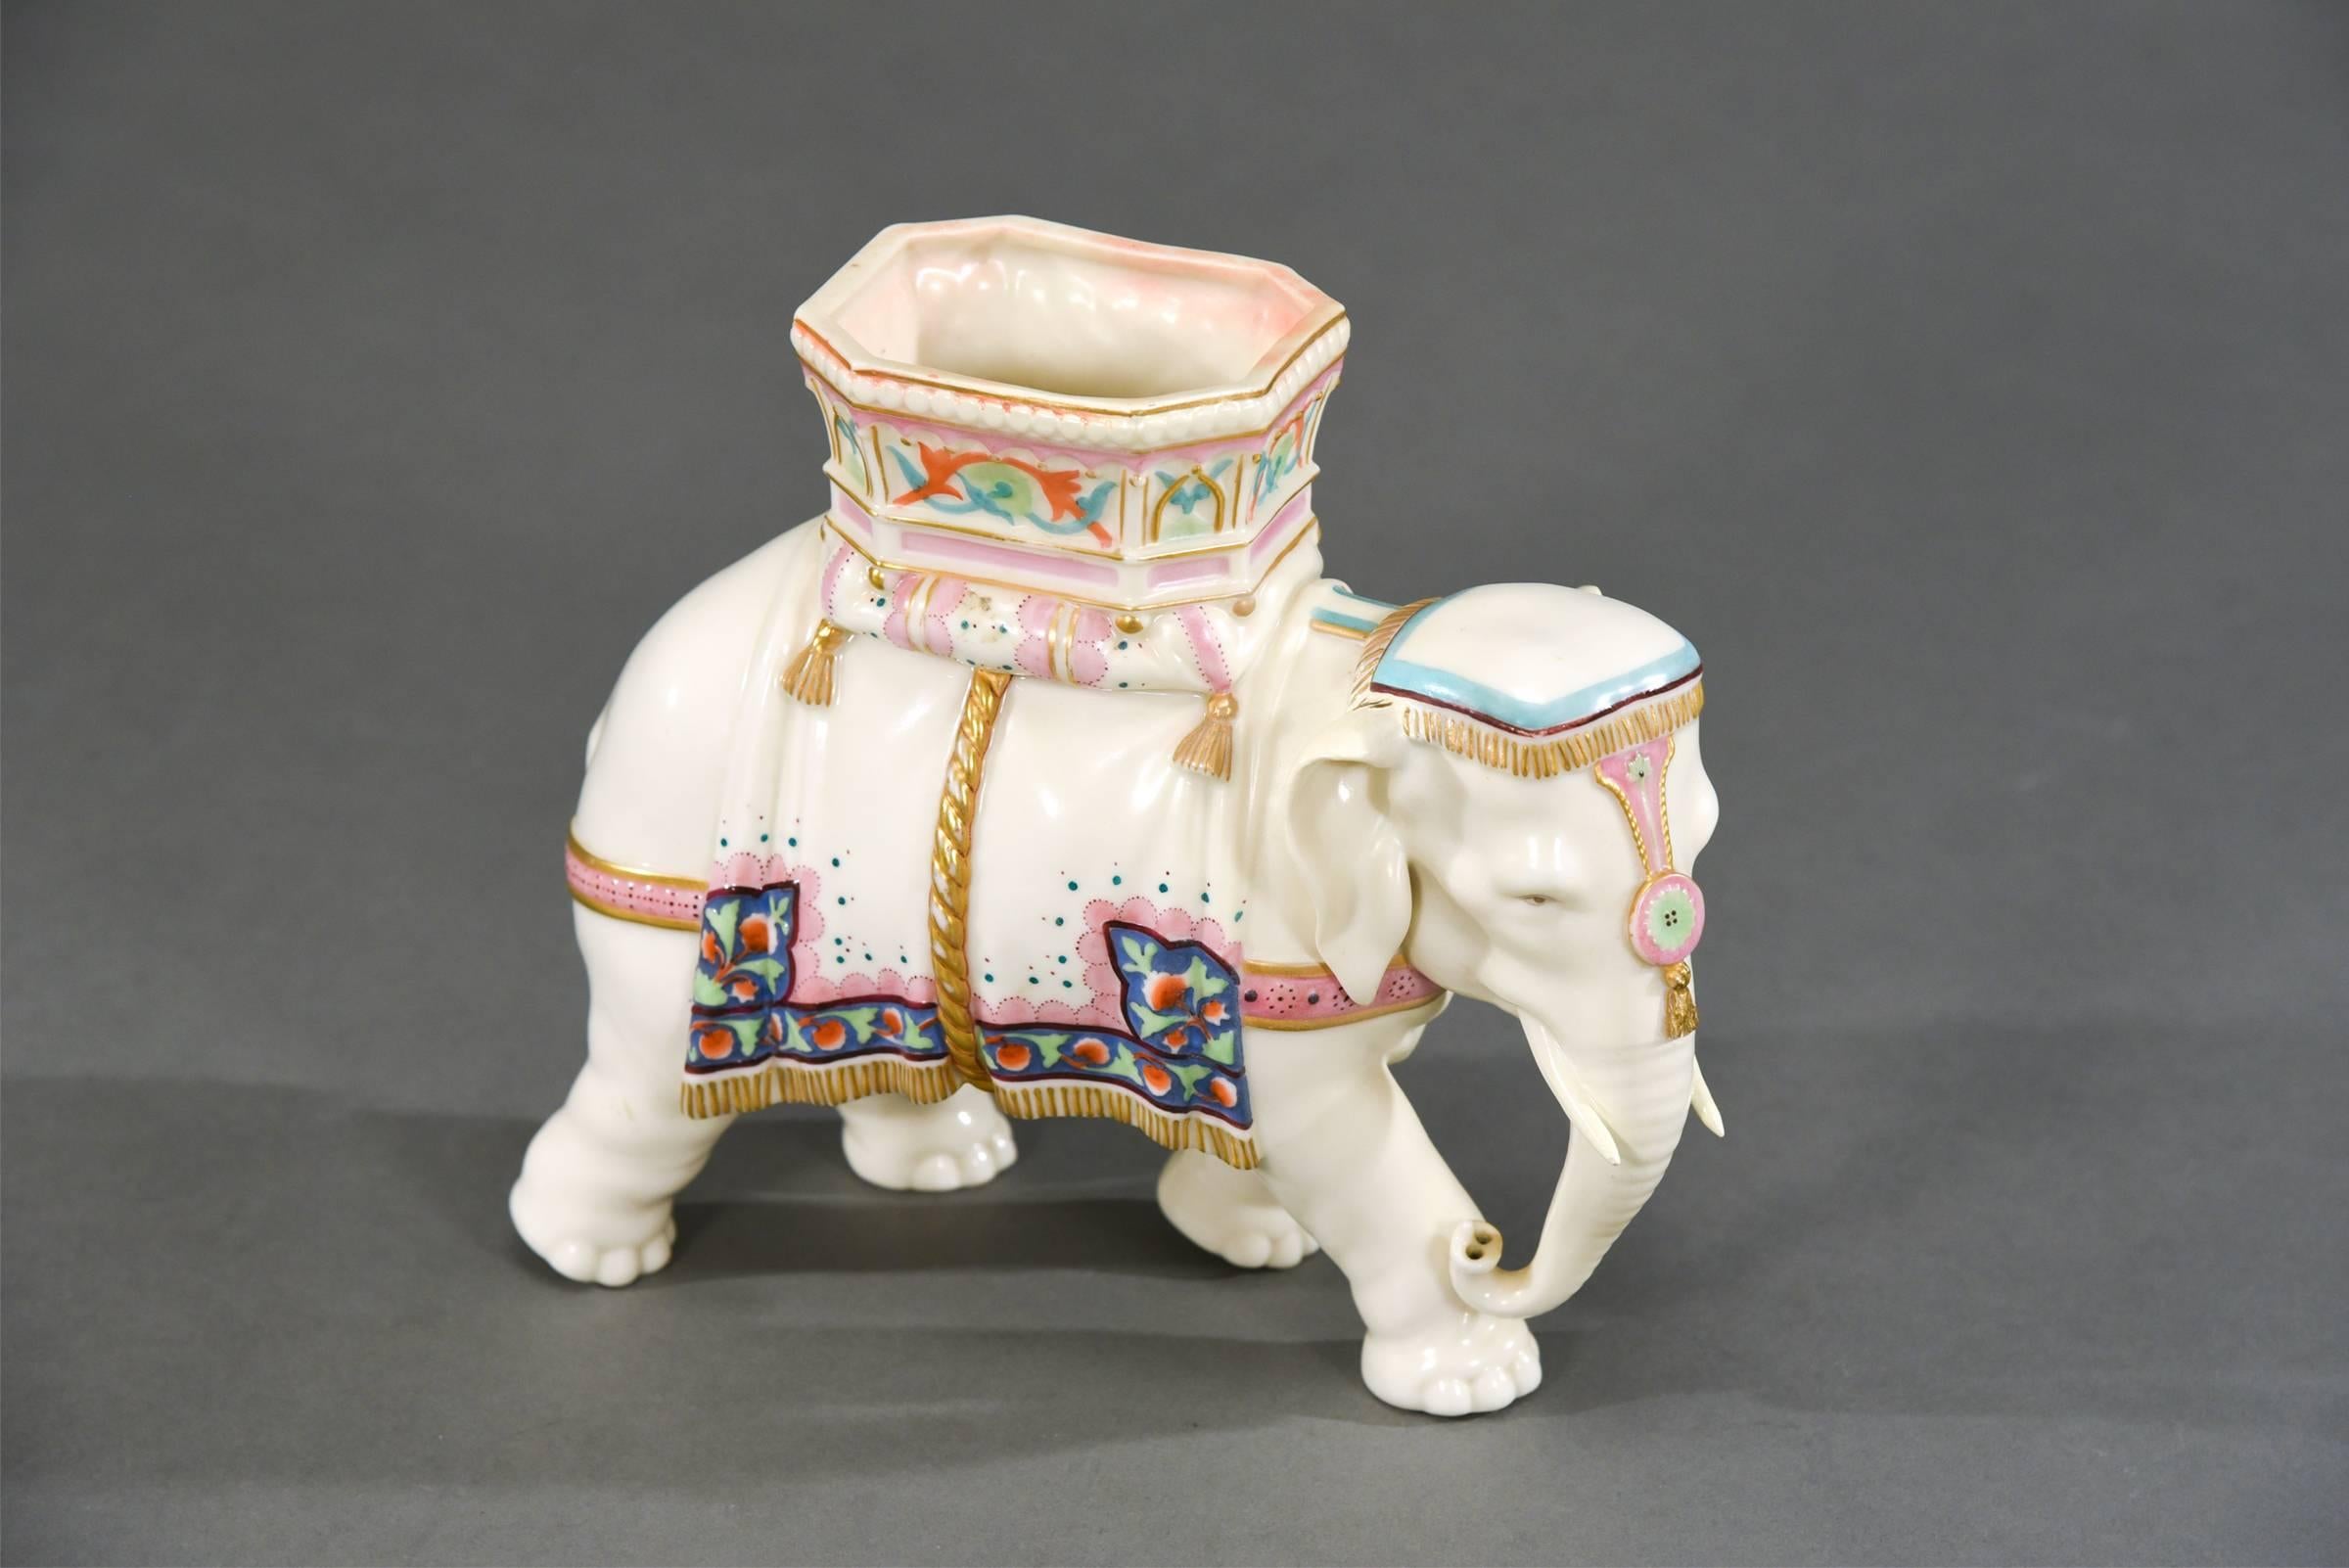 This is a charming 19th century English figural vase of an Indian elephant wearing a ceremonial howdah and head dress. Modelled by Royal Worcester's chief modeller, James Hadley, it is hand-painted in polychrome enamels and highlighted in gold.